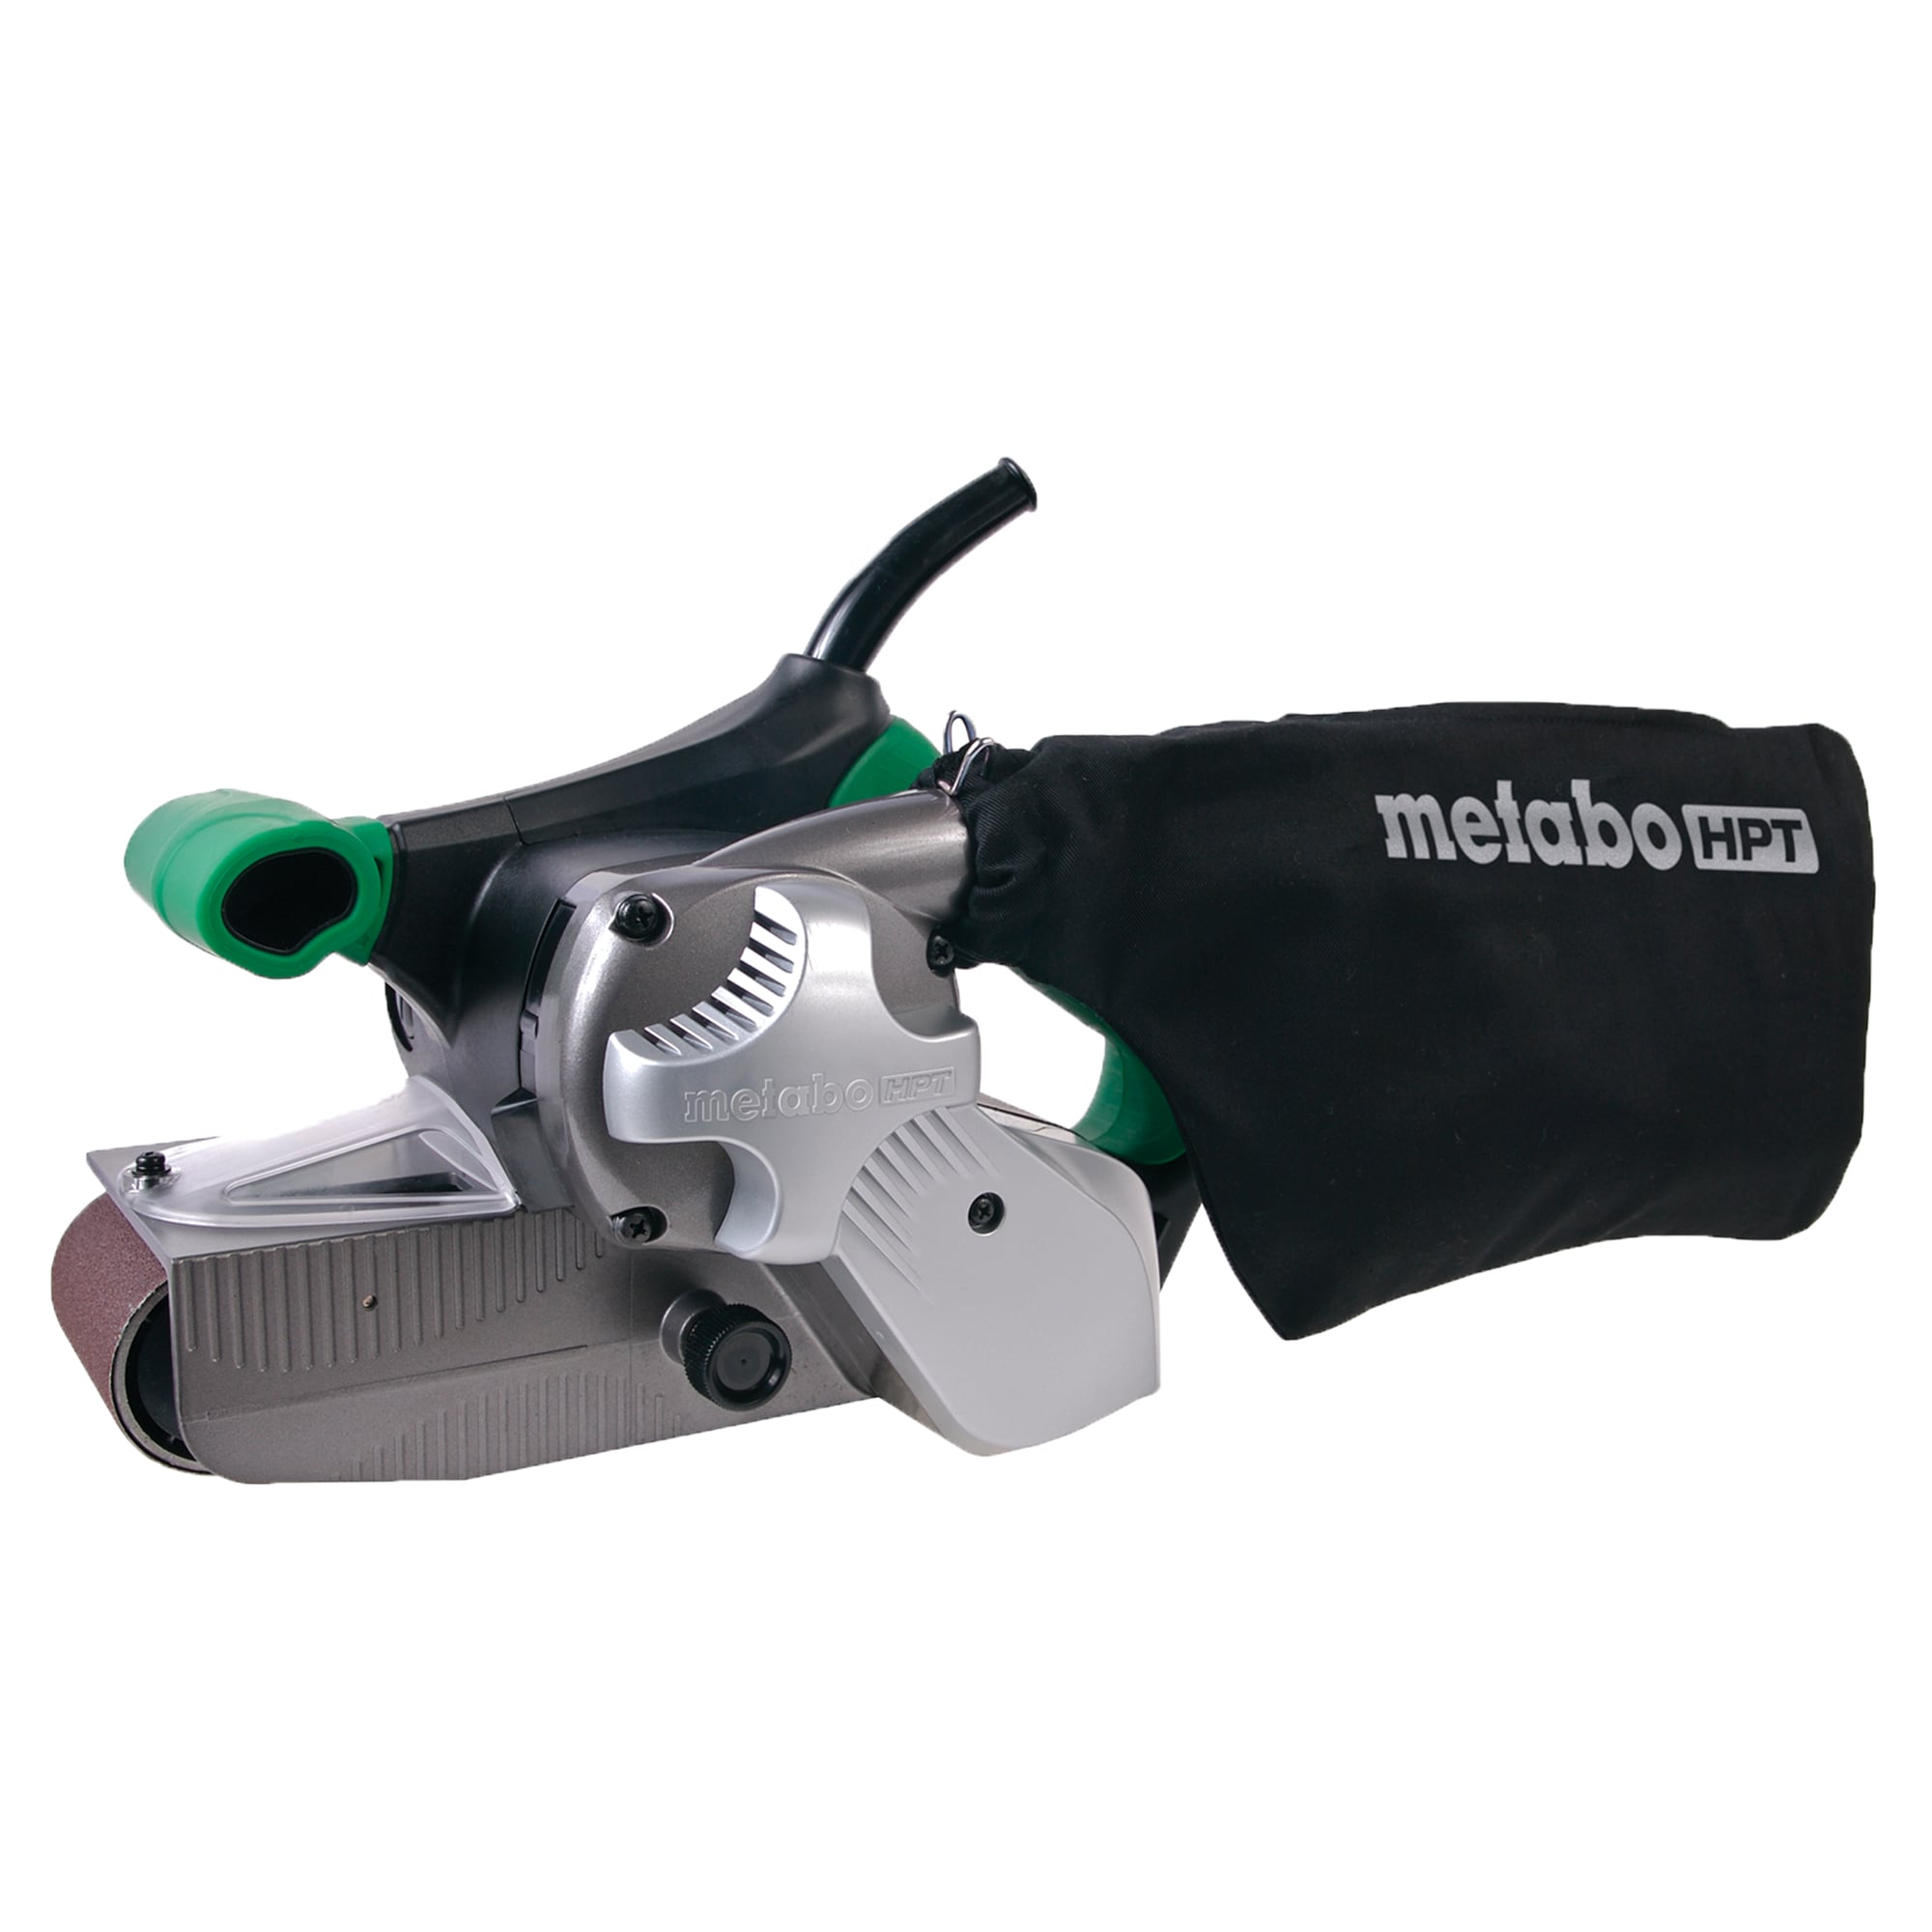 Metabo HPT 9-Amp Corded Belt Sander with Dust Management in the